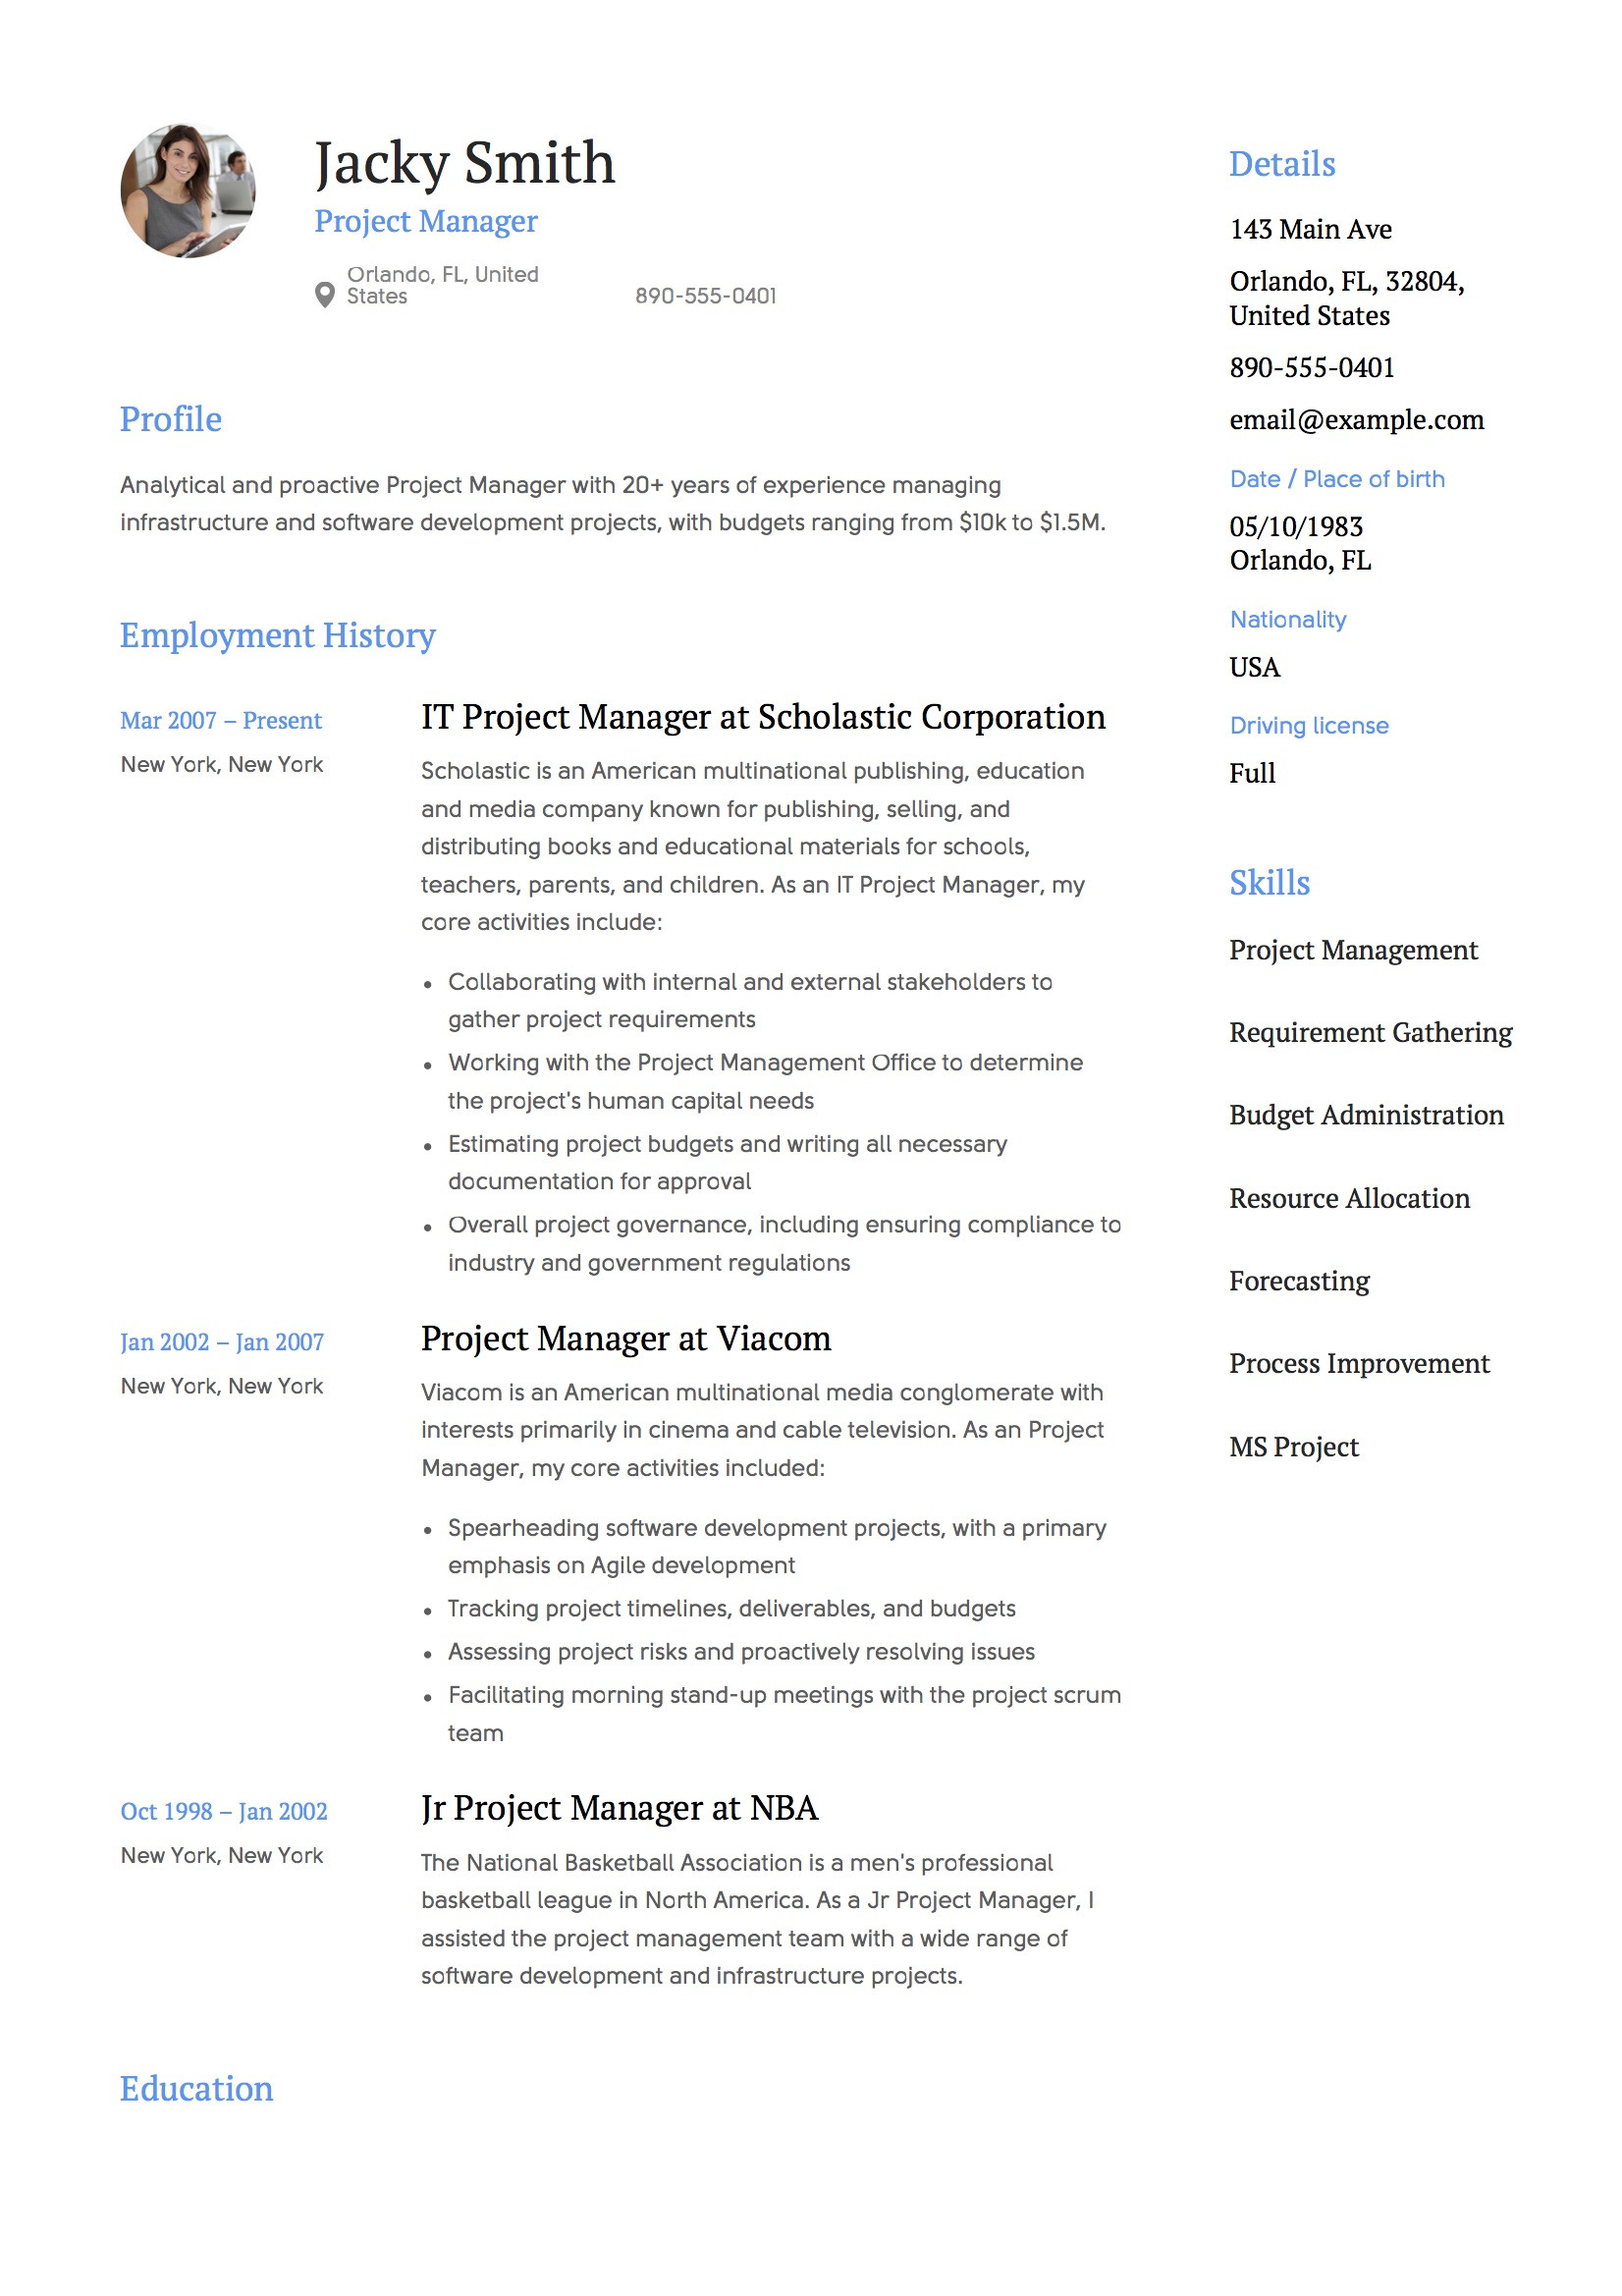 Resume Template for 20 Years Experience 20 Project Manager Resume Examples & Full Guide Pdf & Word 2021